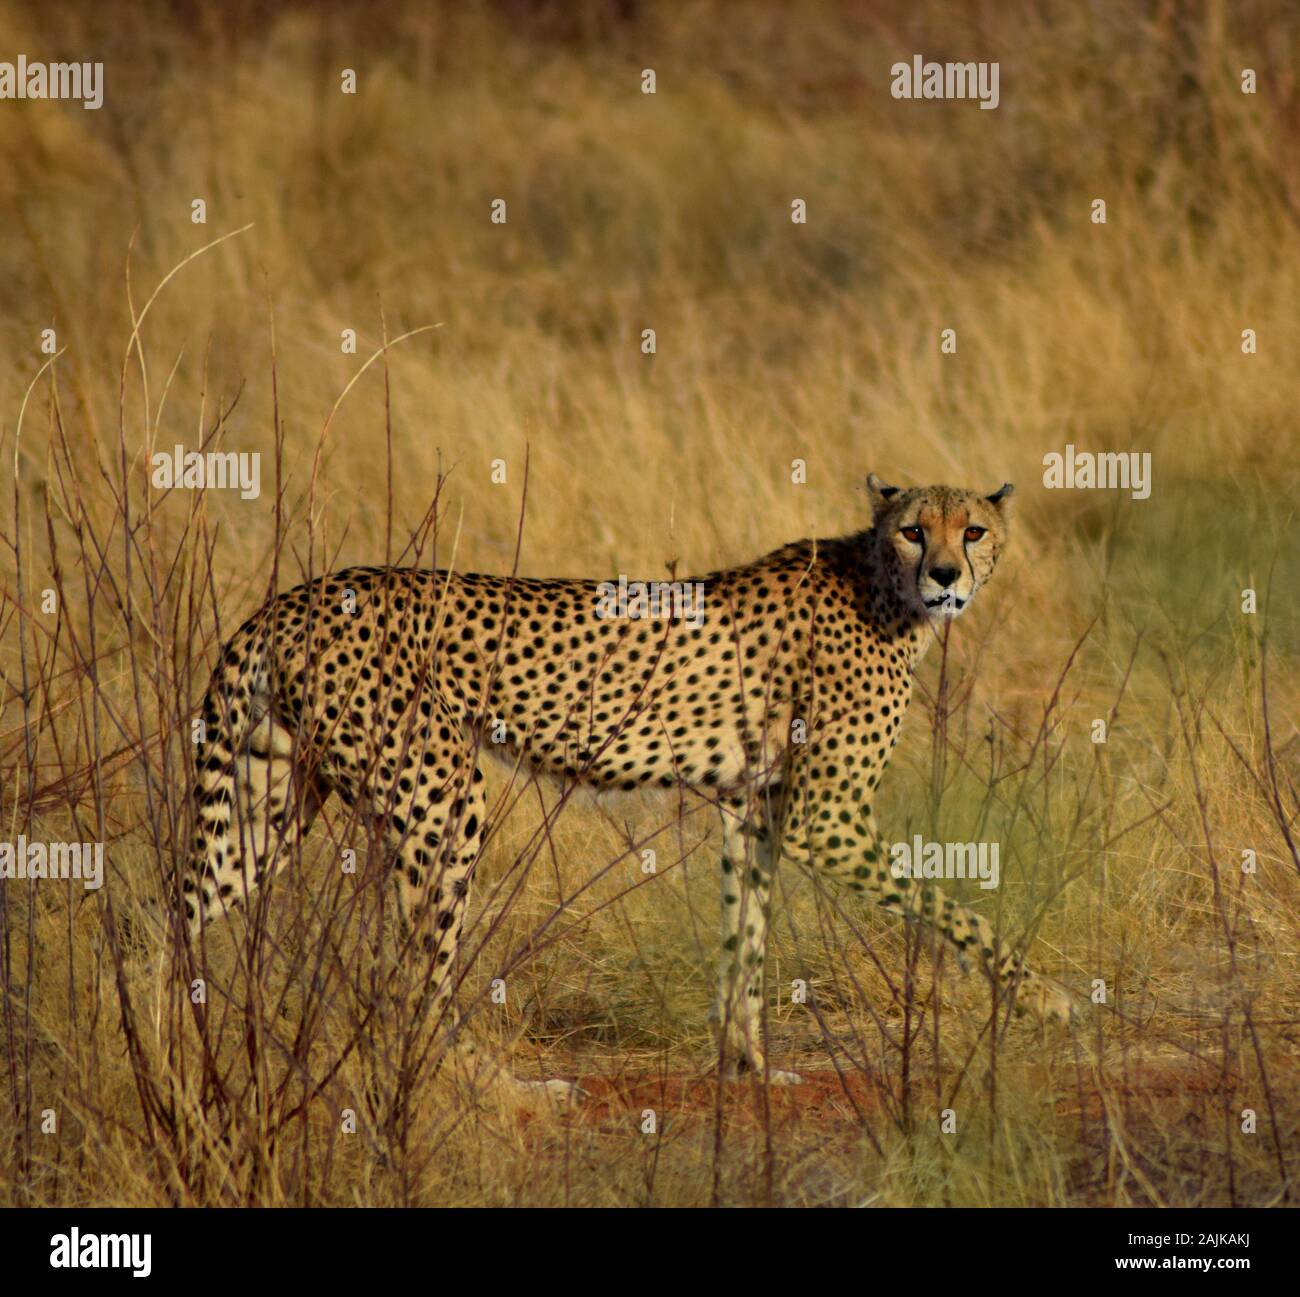 Side view of a beautiful cheetah walking from left to right through the dry and tall grass of African savannah and looking directly into the camera Stock Photo